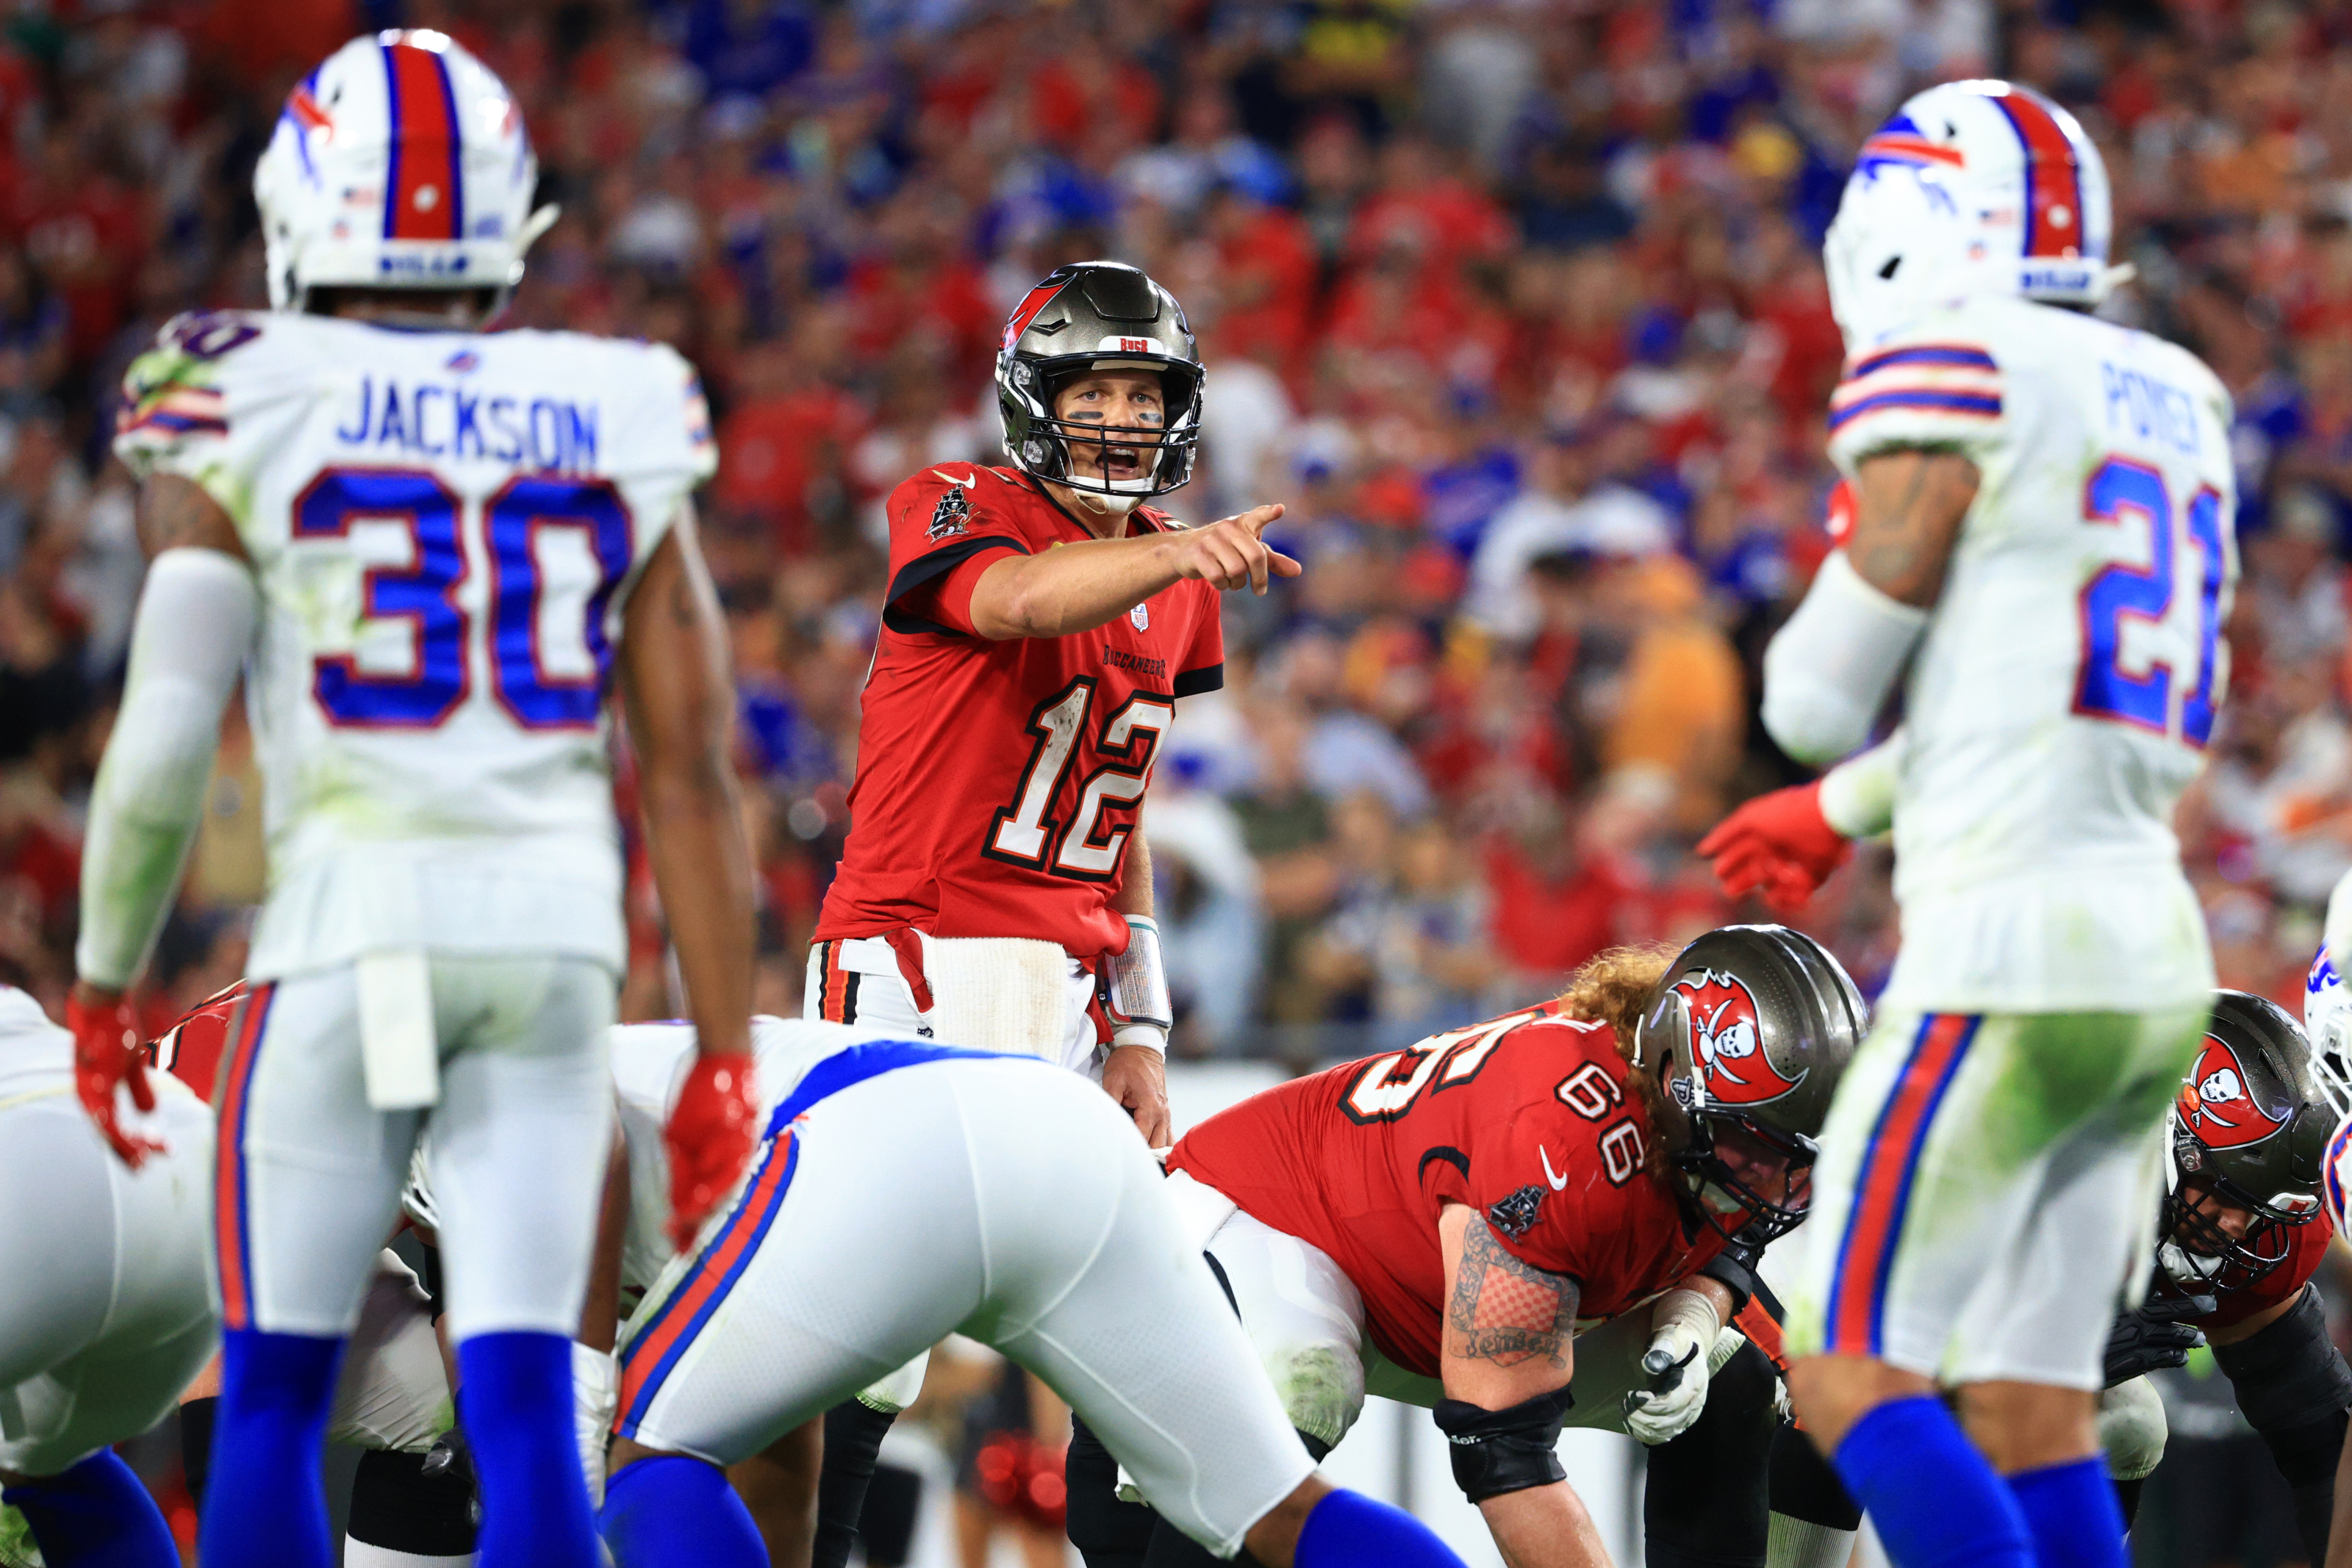 Tampa Bay Buccaneers: Tom Brady saved the day, but concerns loom